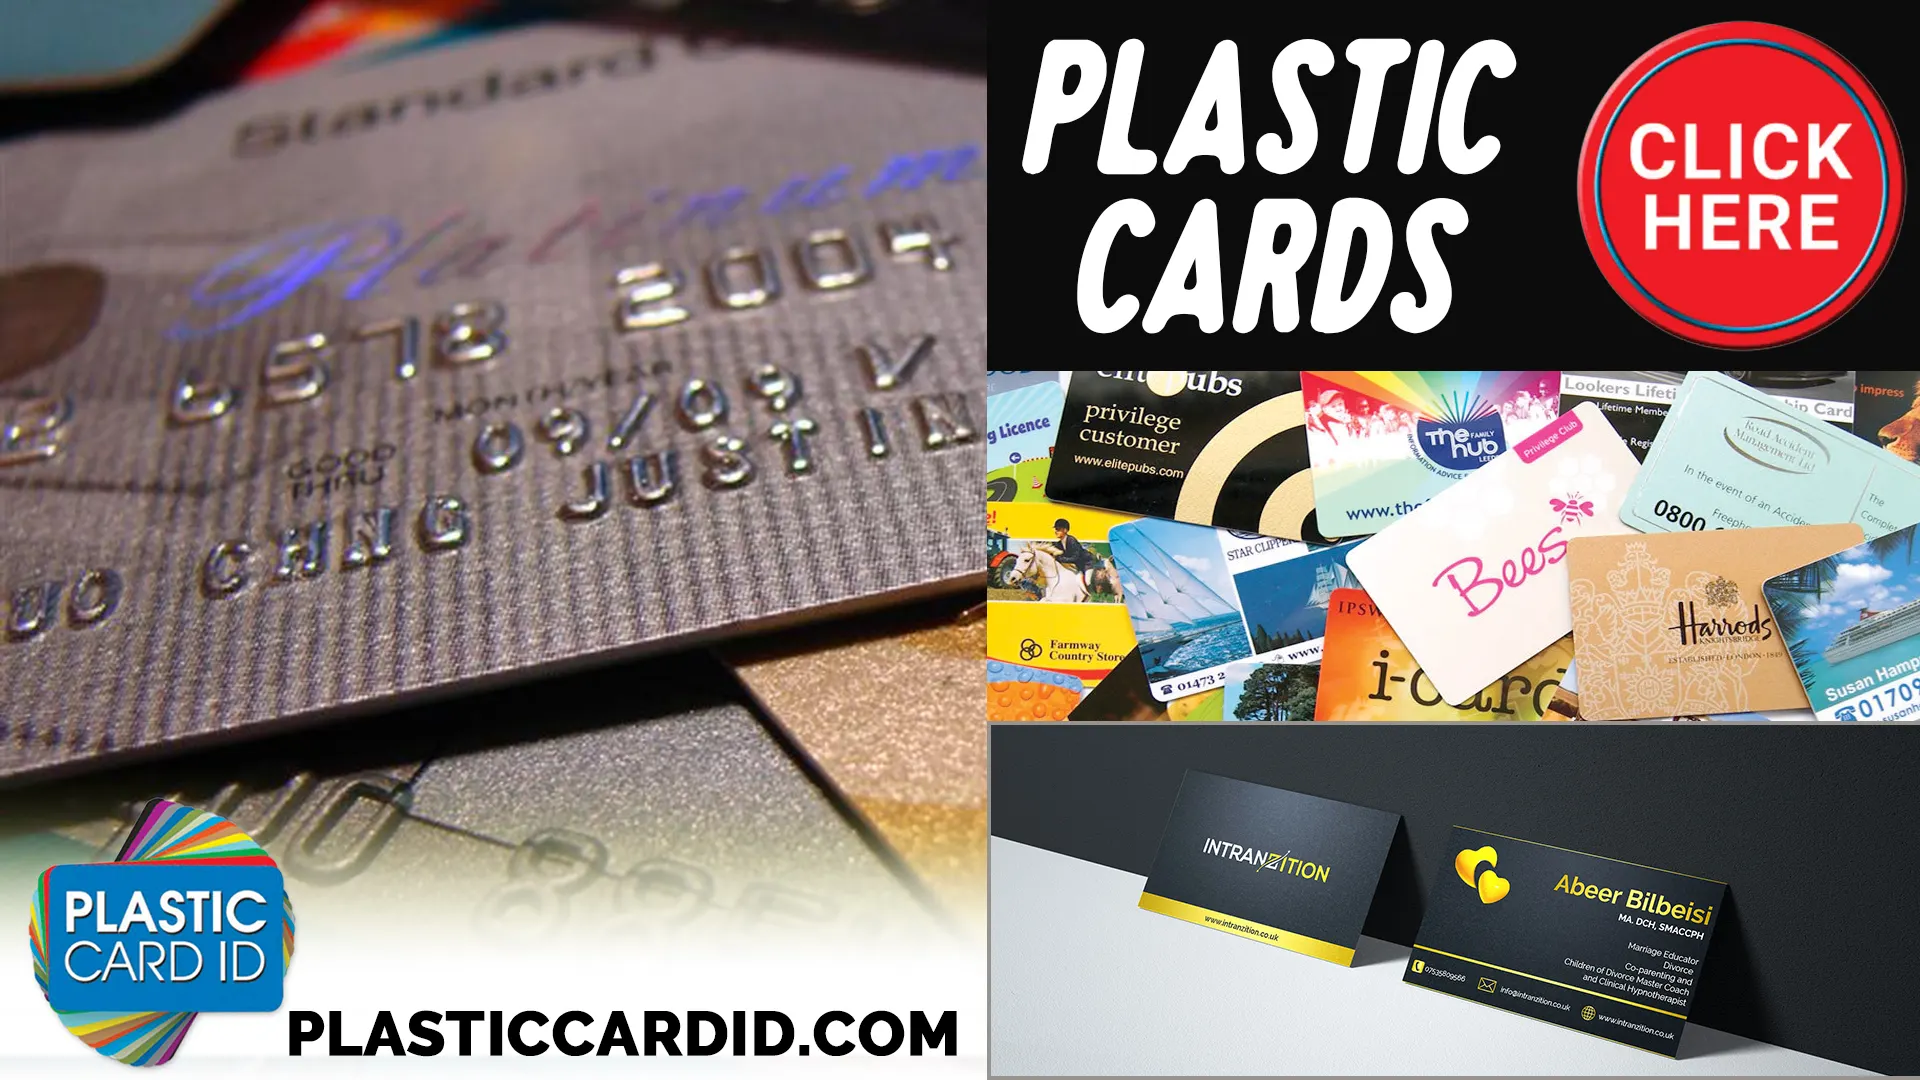 Plastic Card ID
's Commitment to Education